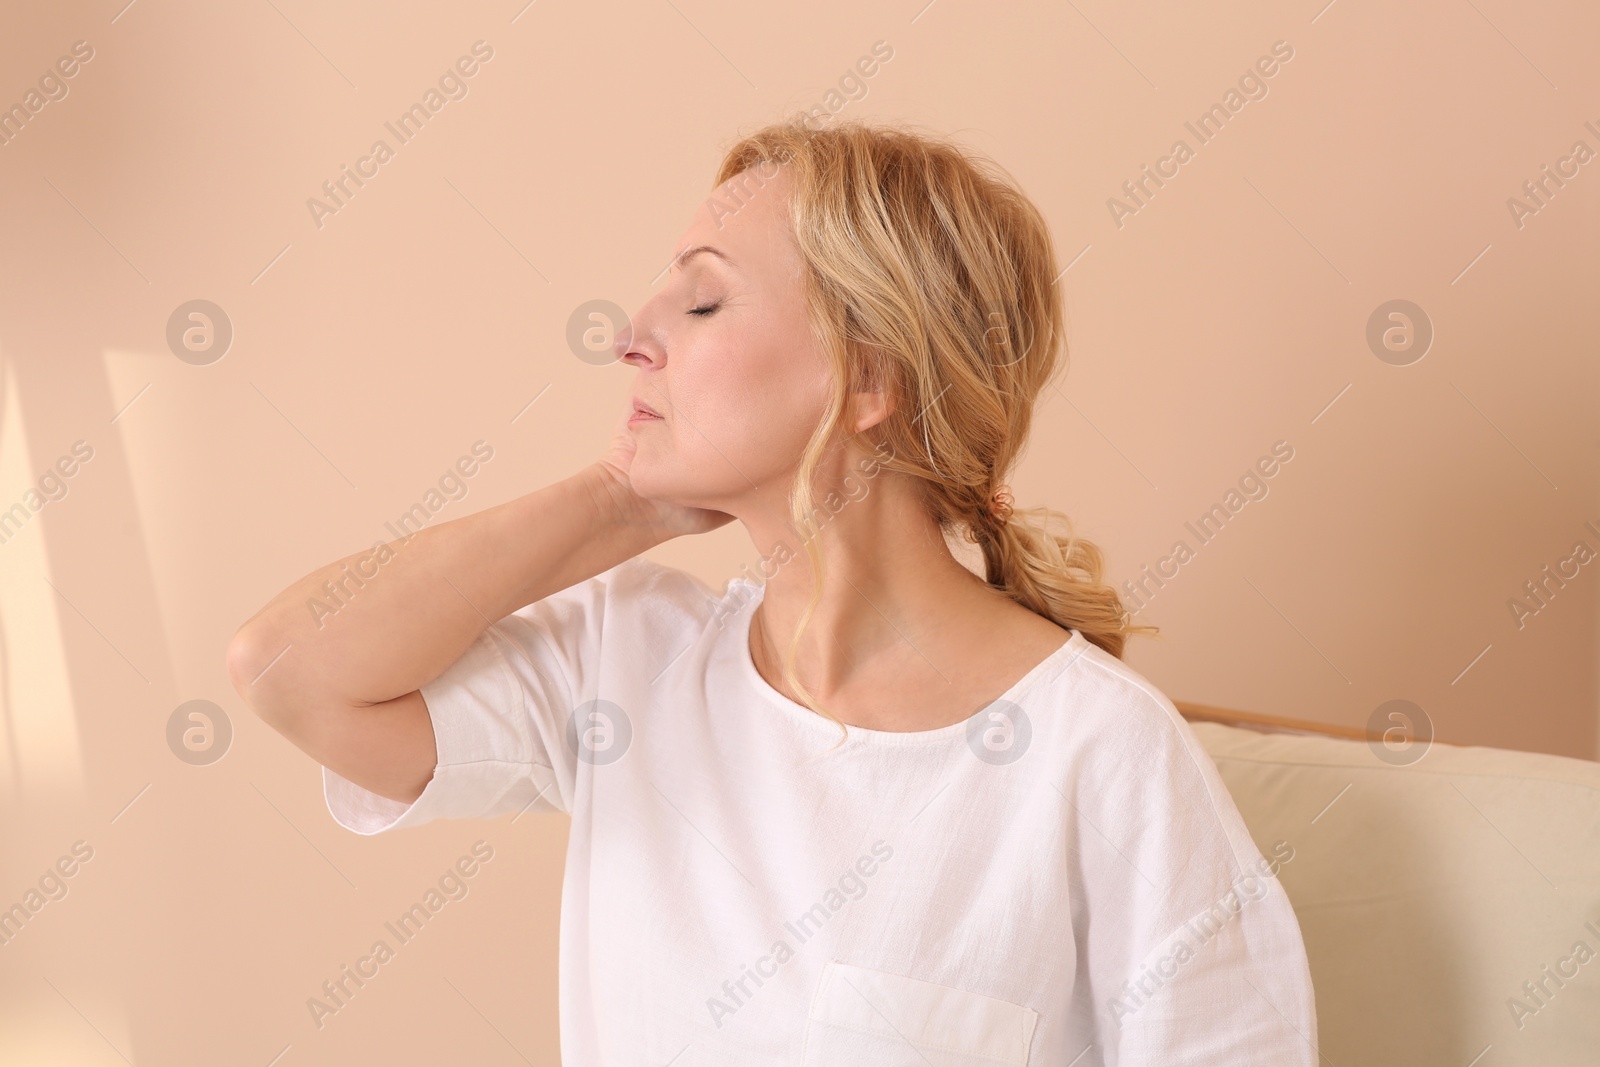 Photo of Woman suffering from hormonal disorders near beige wall indoors